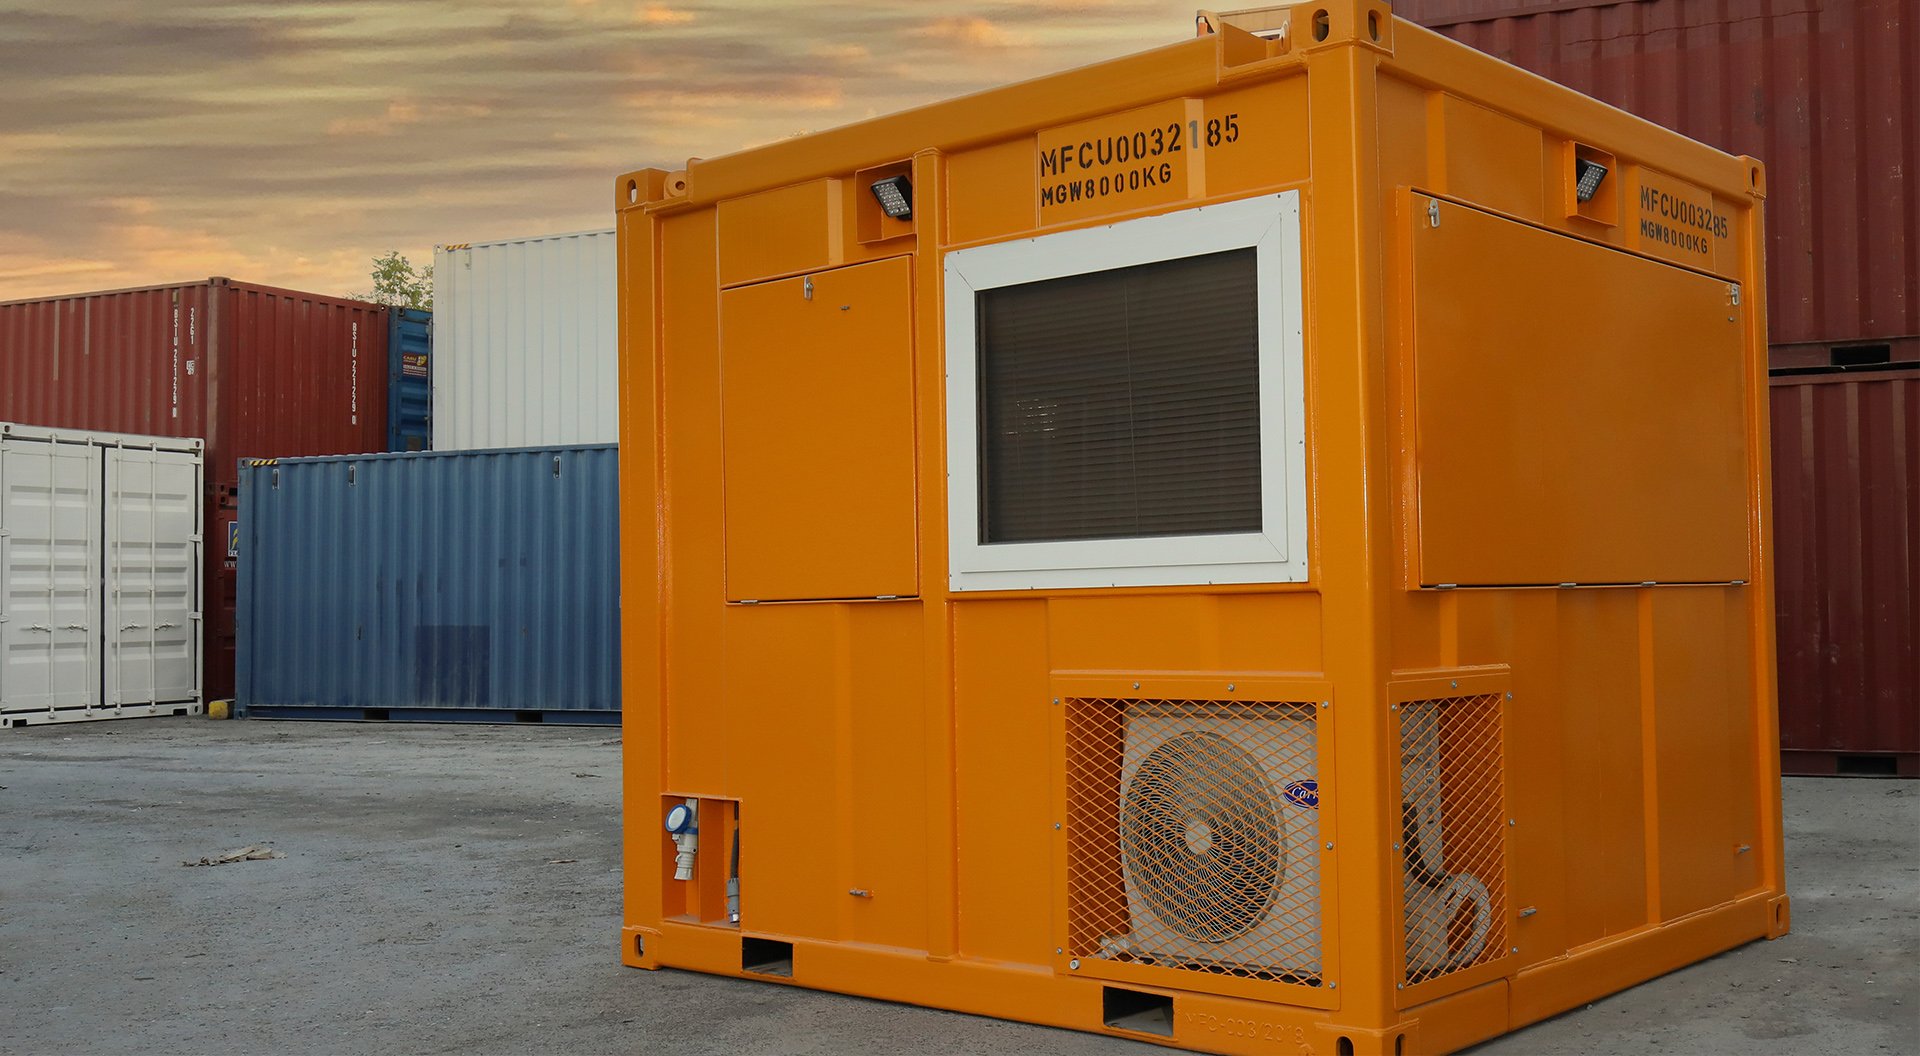 DNV STANDARD OFFSHORE CONTAINERS MFC CONCEPTS